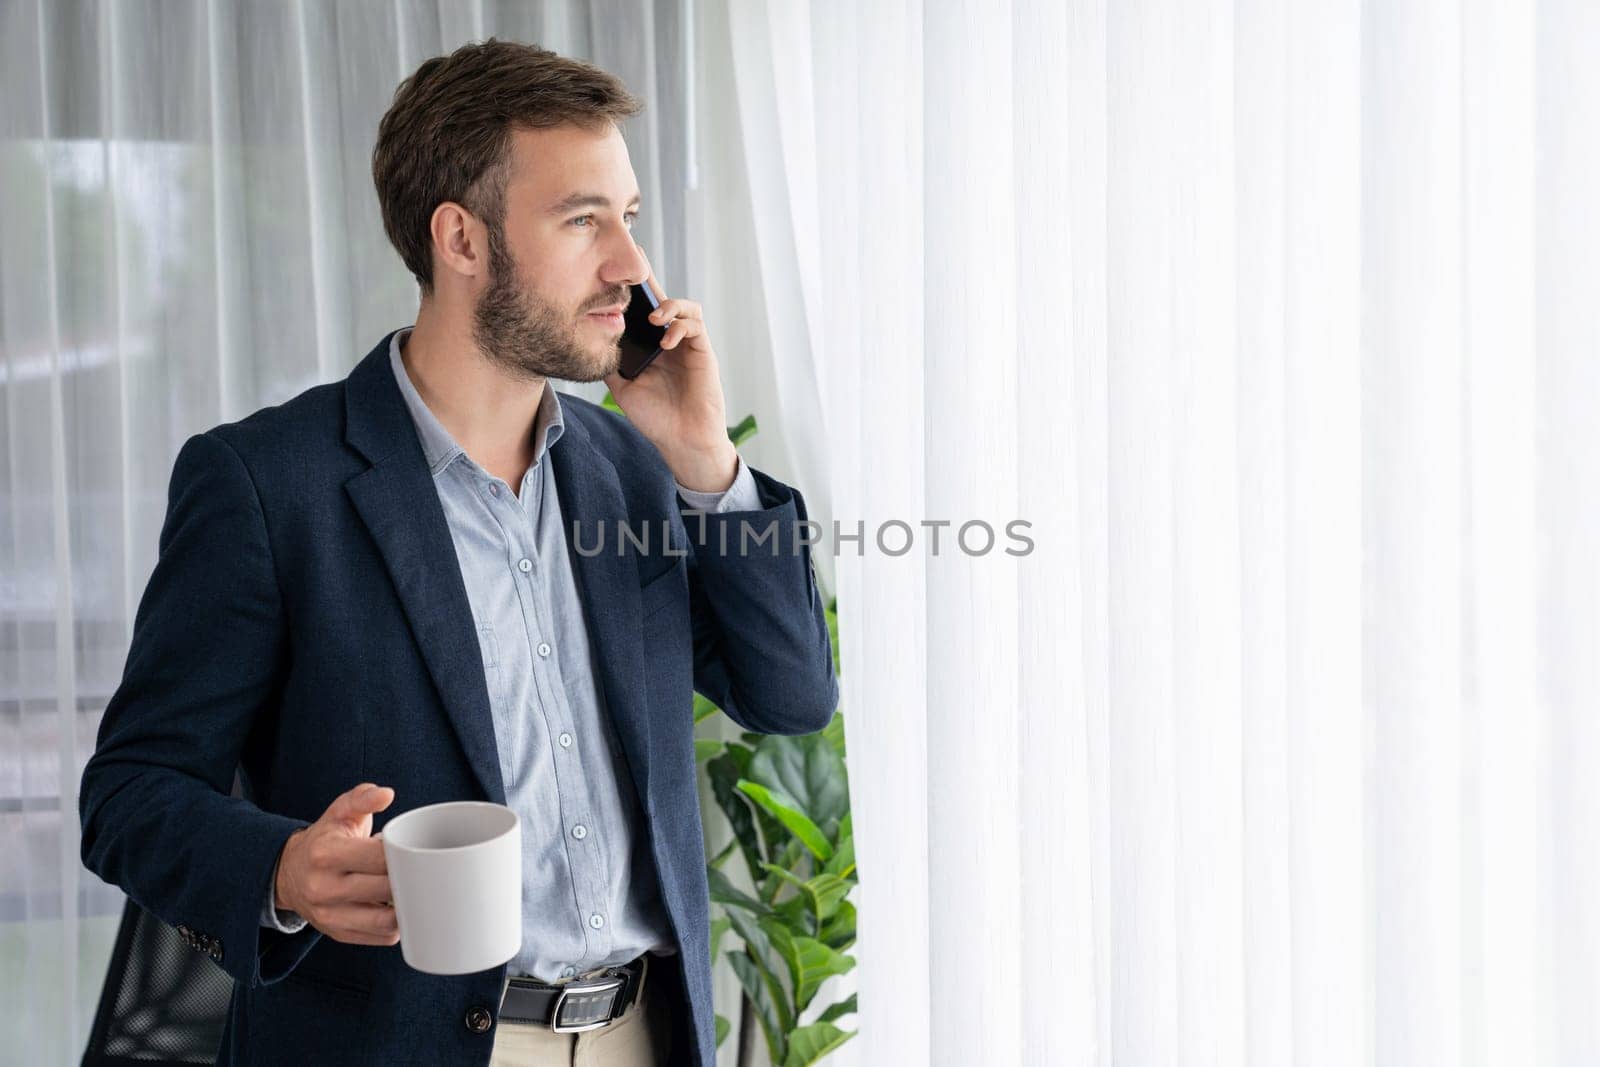 Hardworking businessman stand in modern office talking on phone. Entity by biancoblue